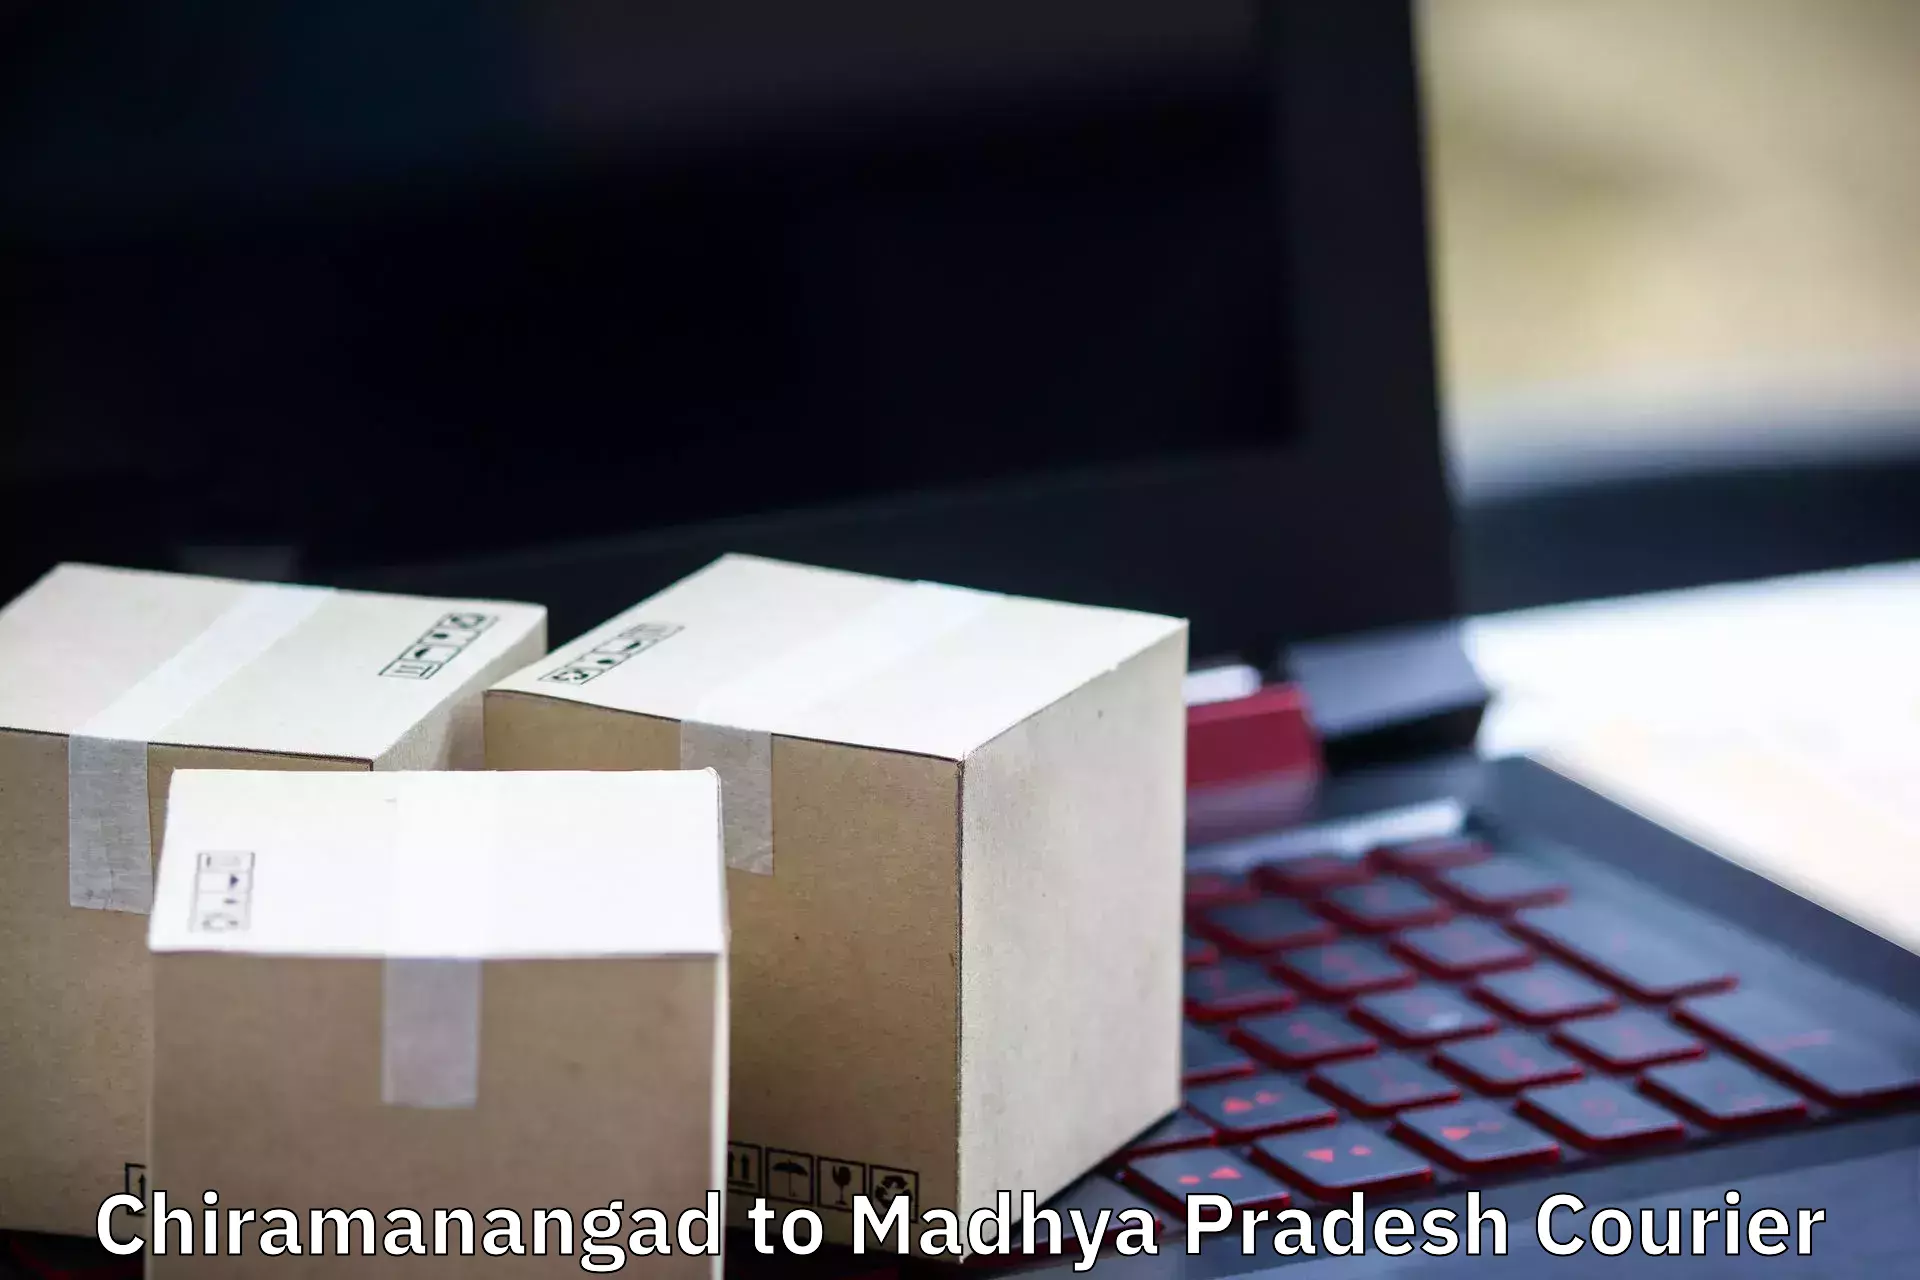 Comprehensive moving assistance Chiramanangad to Bhopal